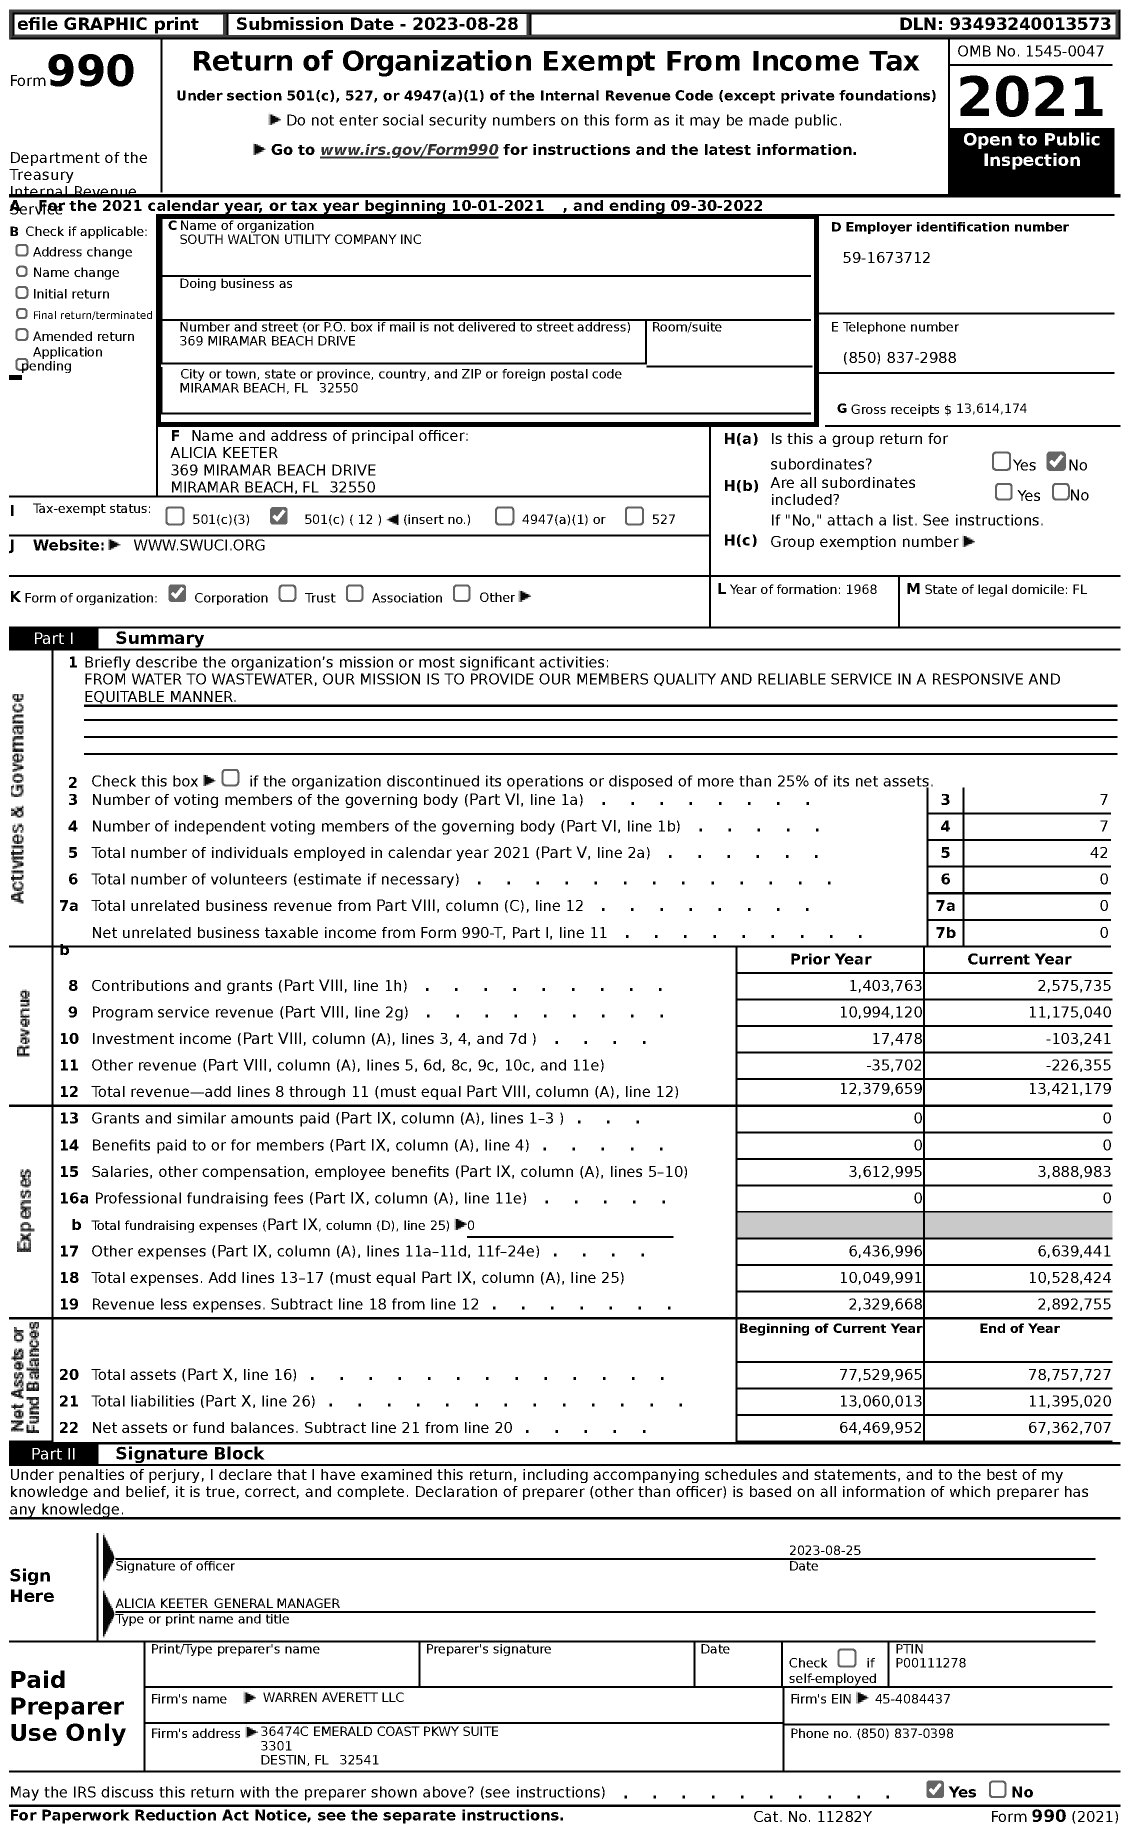 Image of first page of 2021 Form 990 for South Walton Utility Company